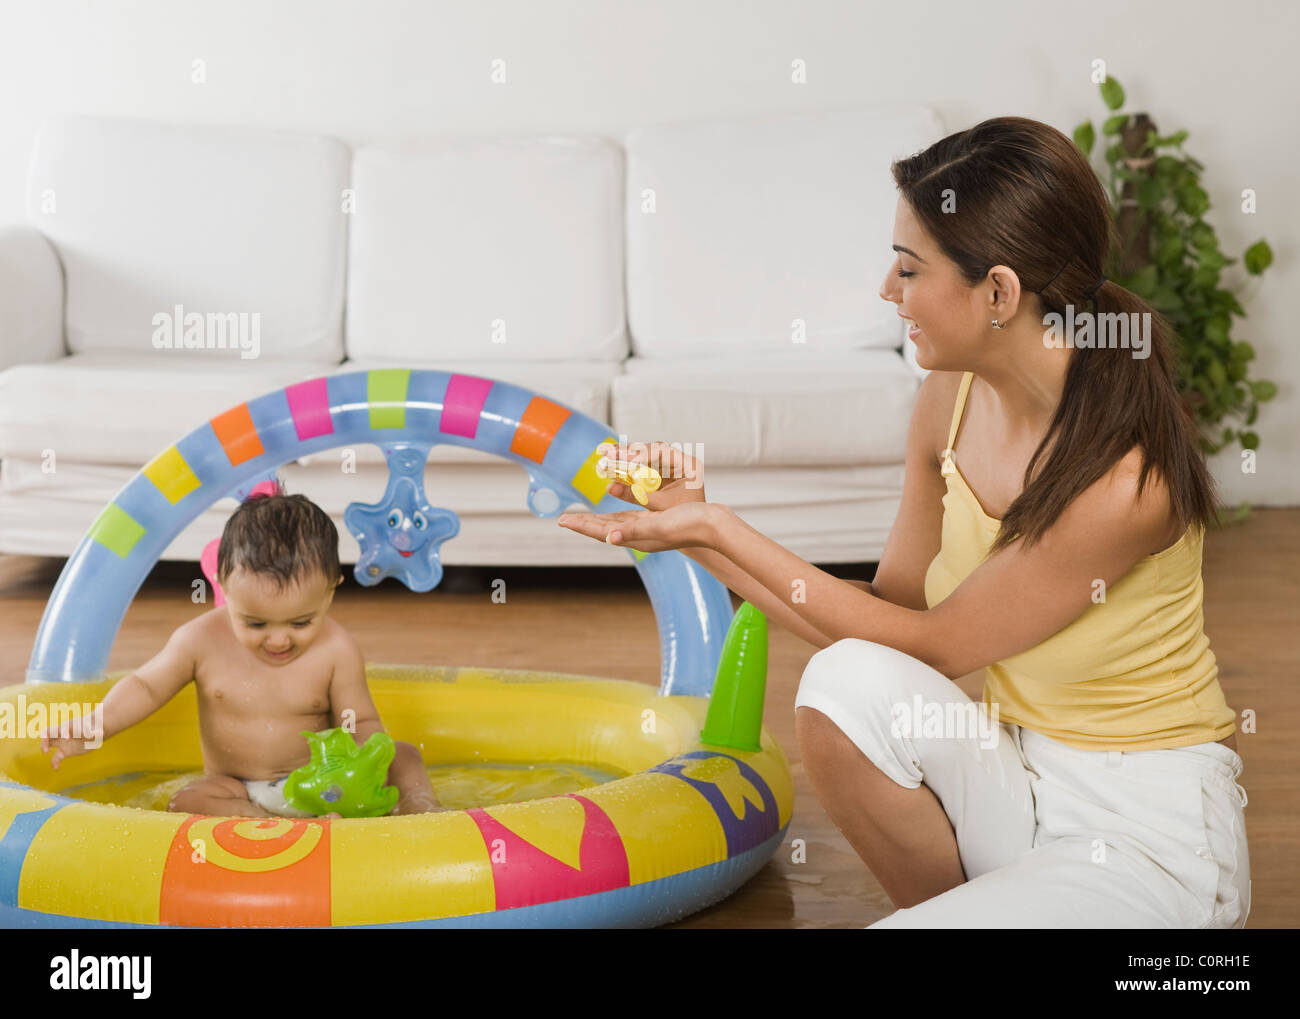 Woman bathing her son in a wading pool Stock Photo